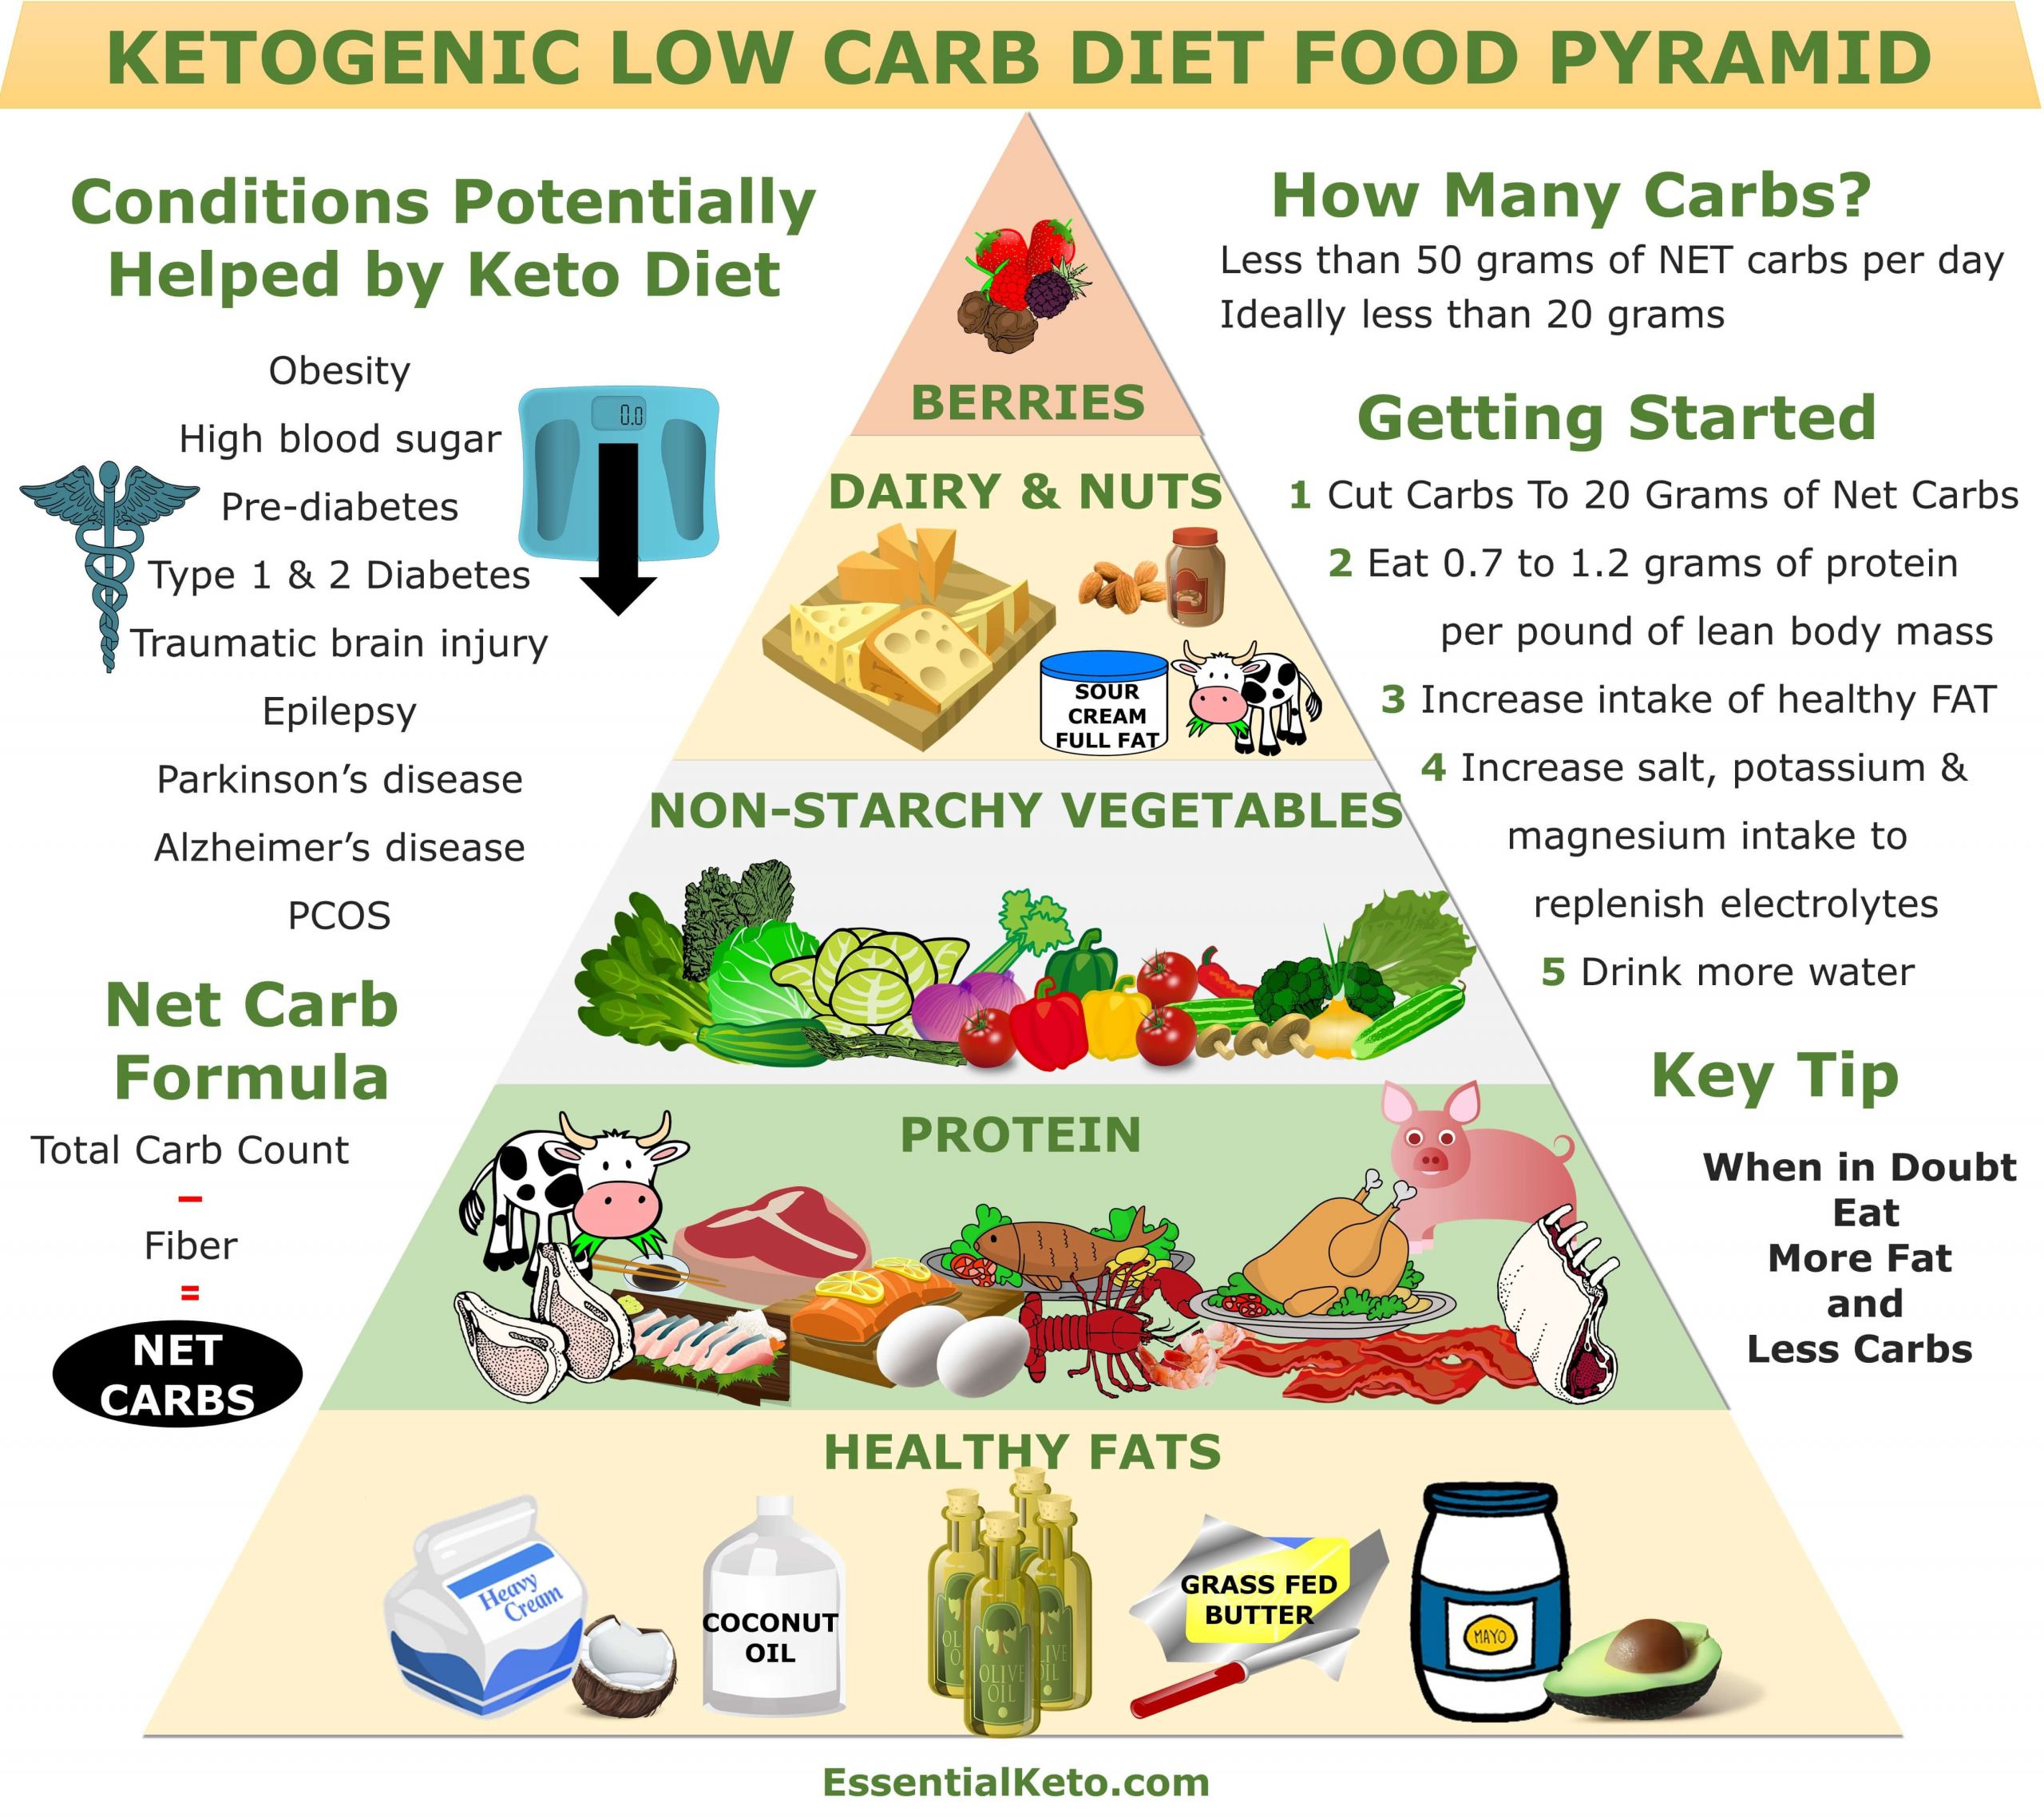 Keto Low Carb Diet Awesome Ketogenic Low Carb Diet Food Pyramid Diet Plan